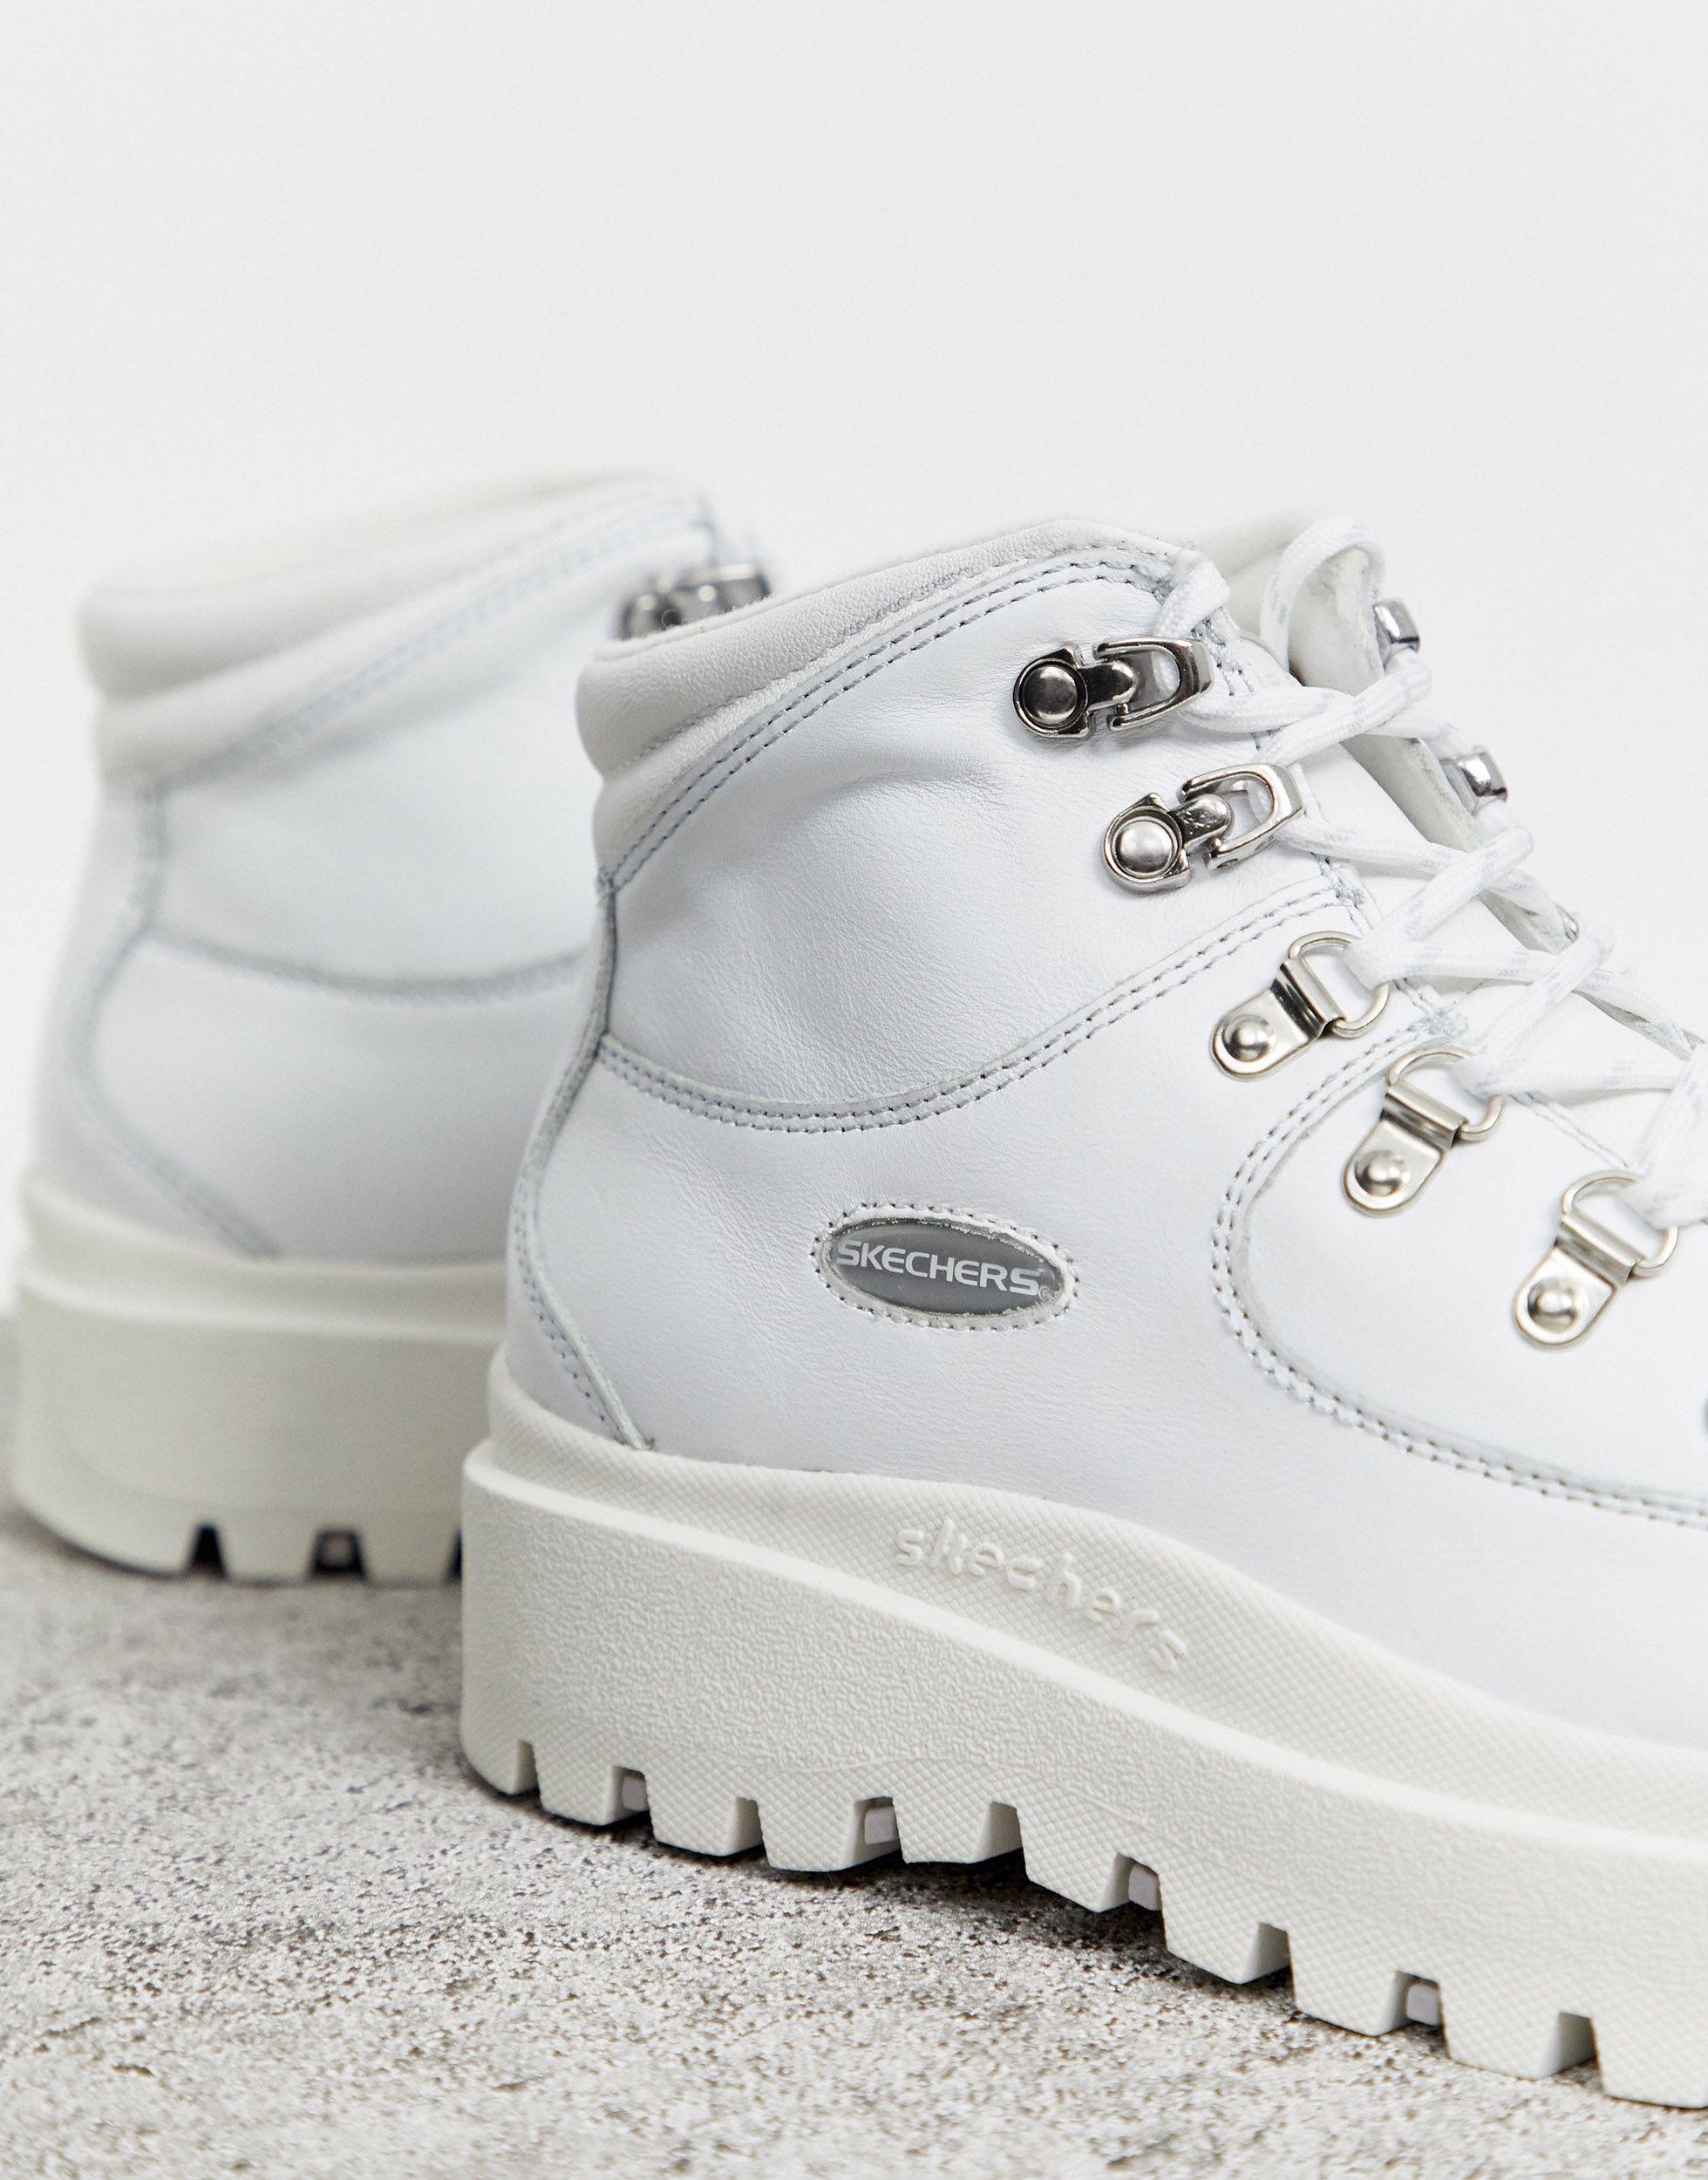 Skechers Shindig 6 Eye Leather Hiker Boot in White | Lyst